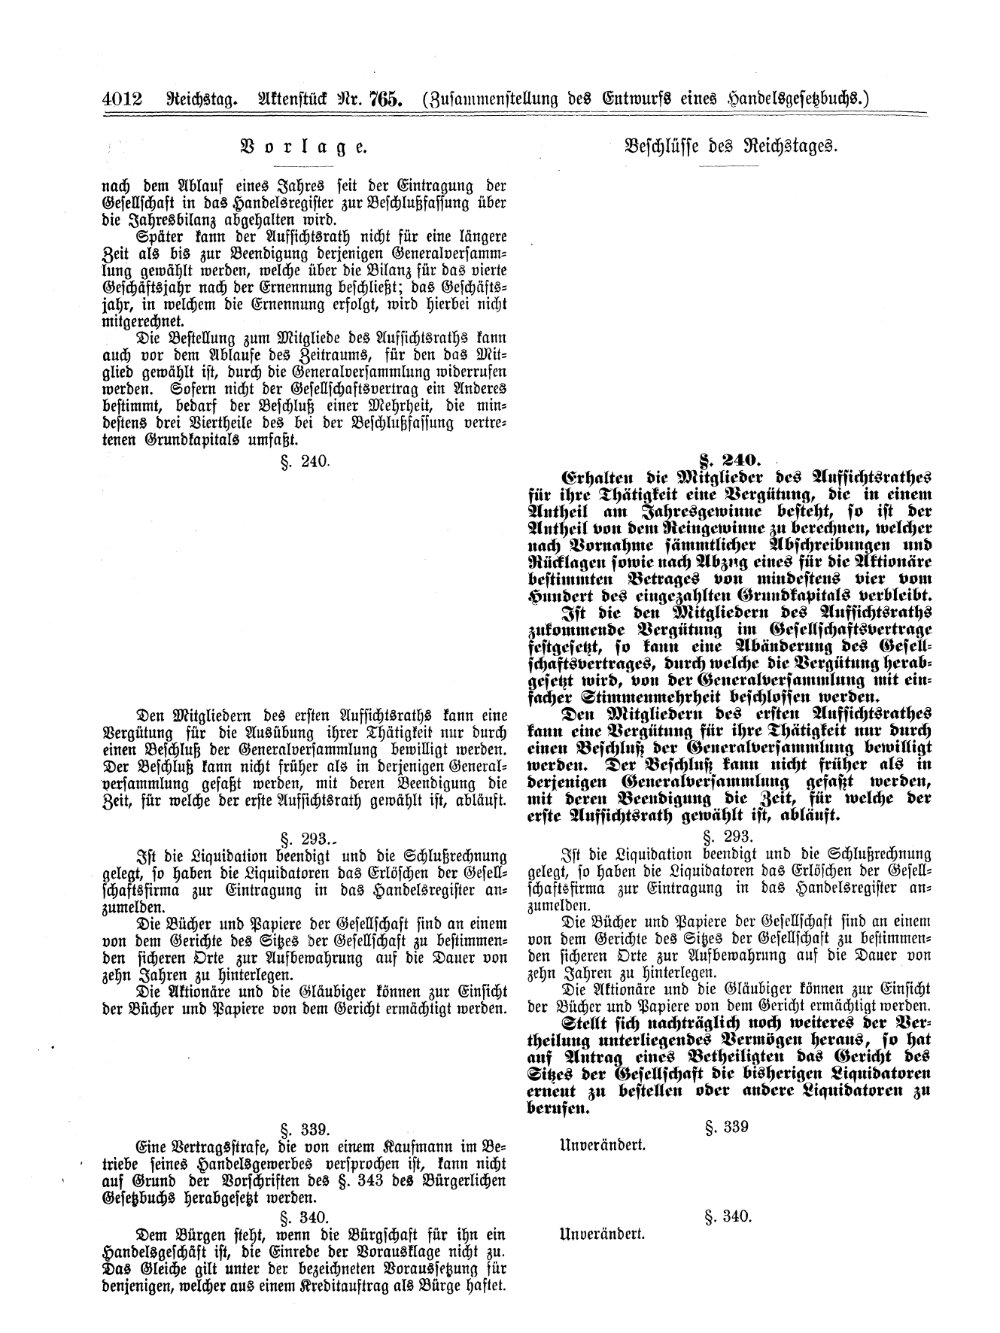 Scan of page 4012